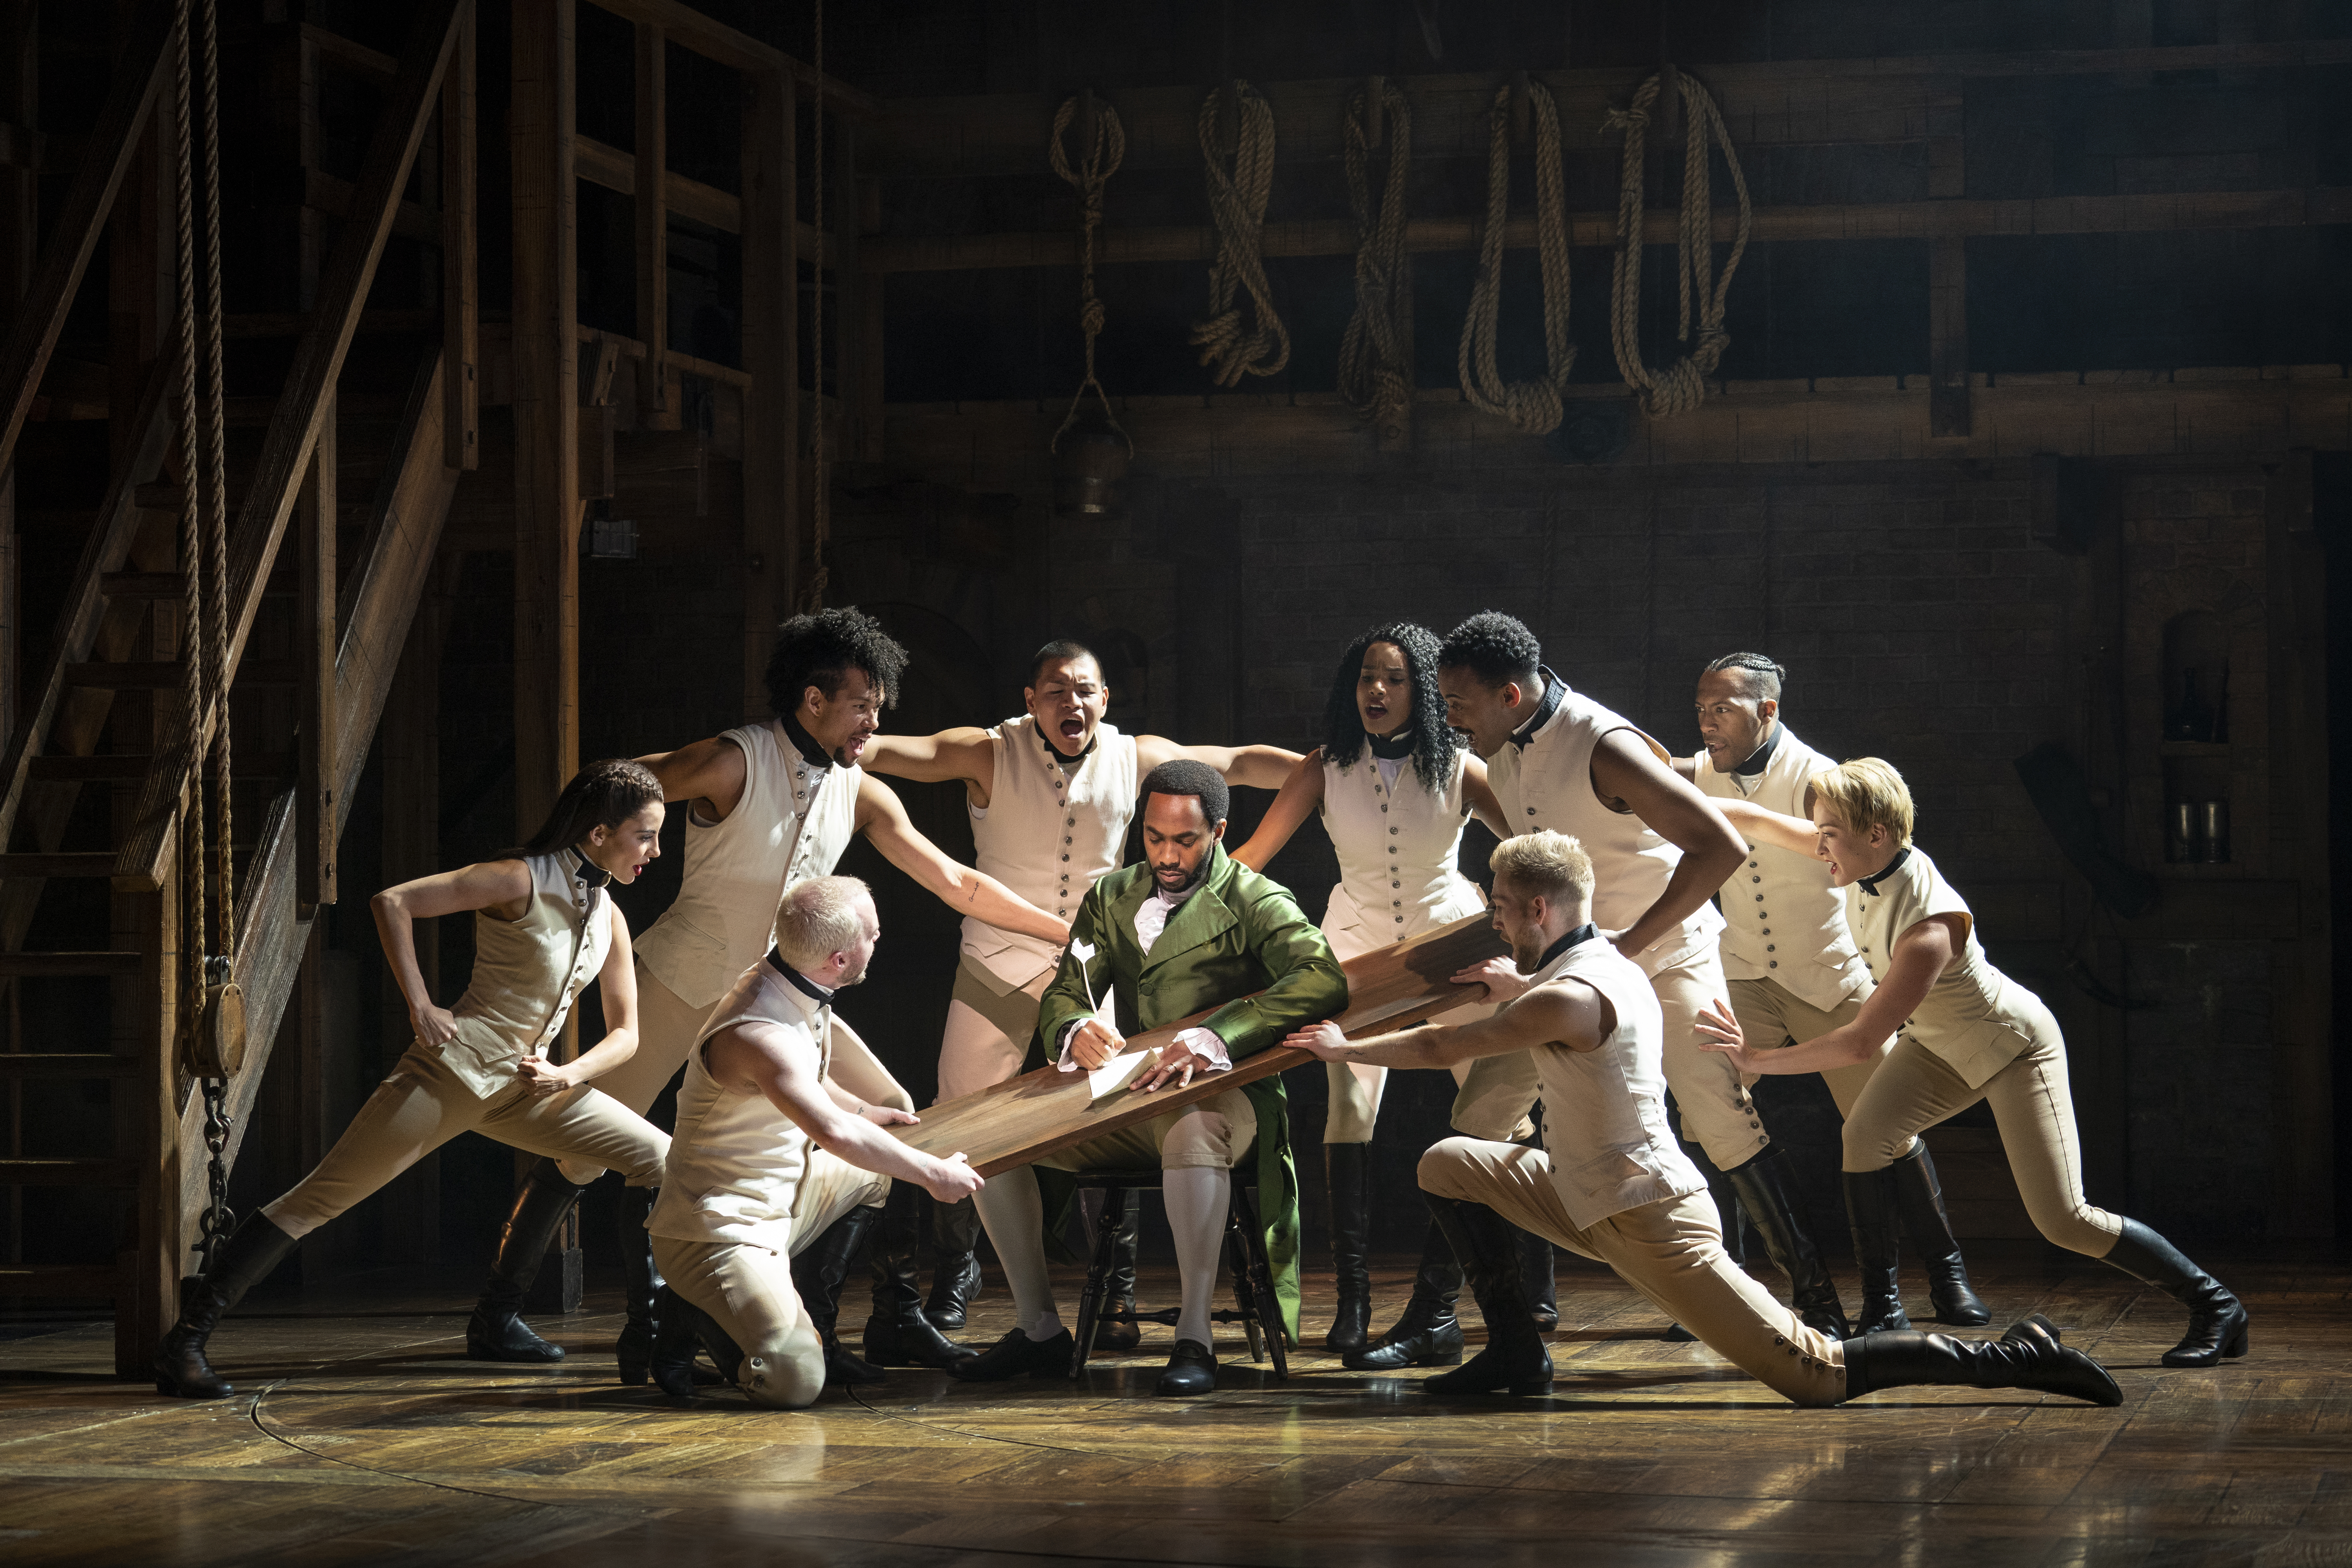 Actors on a stage perform a scene from the musical "Hamilton"